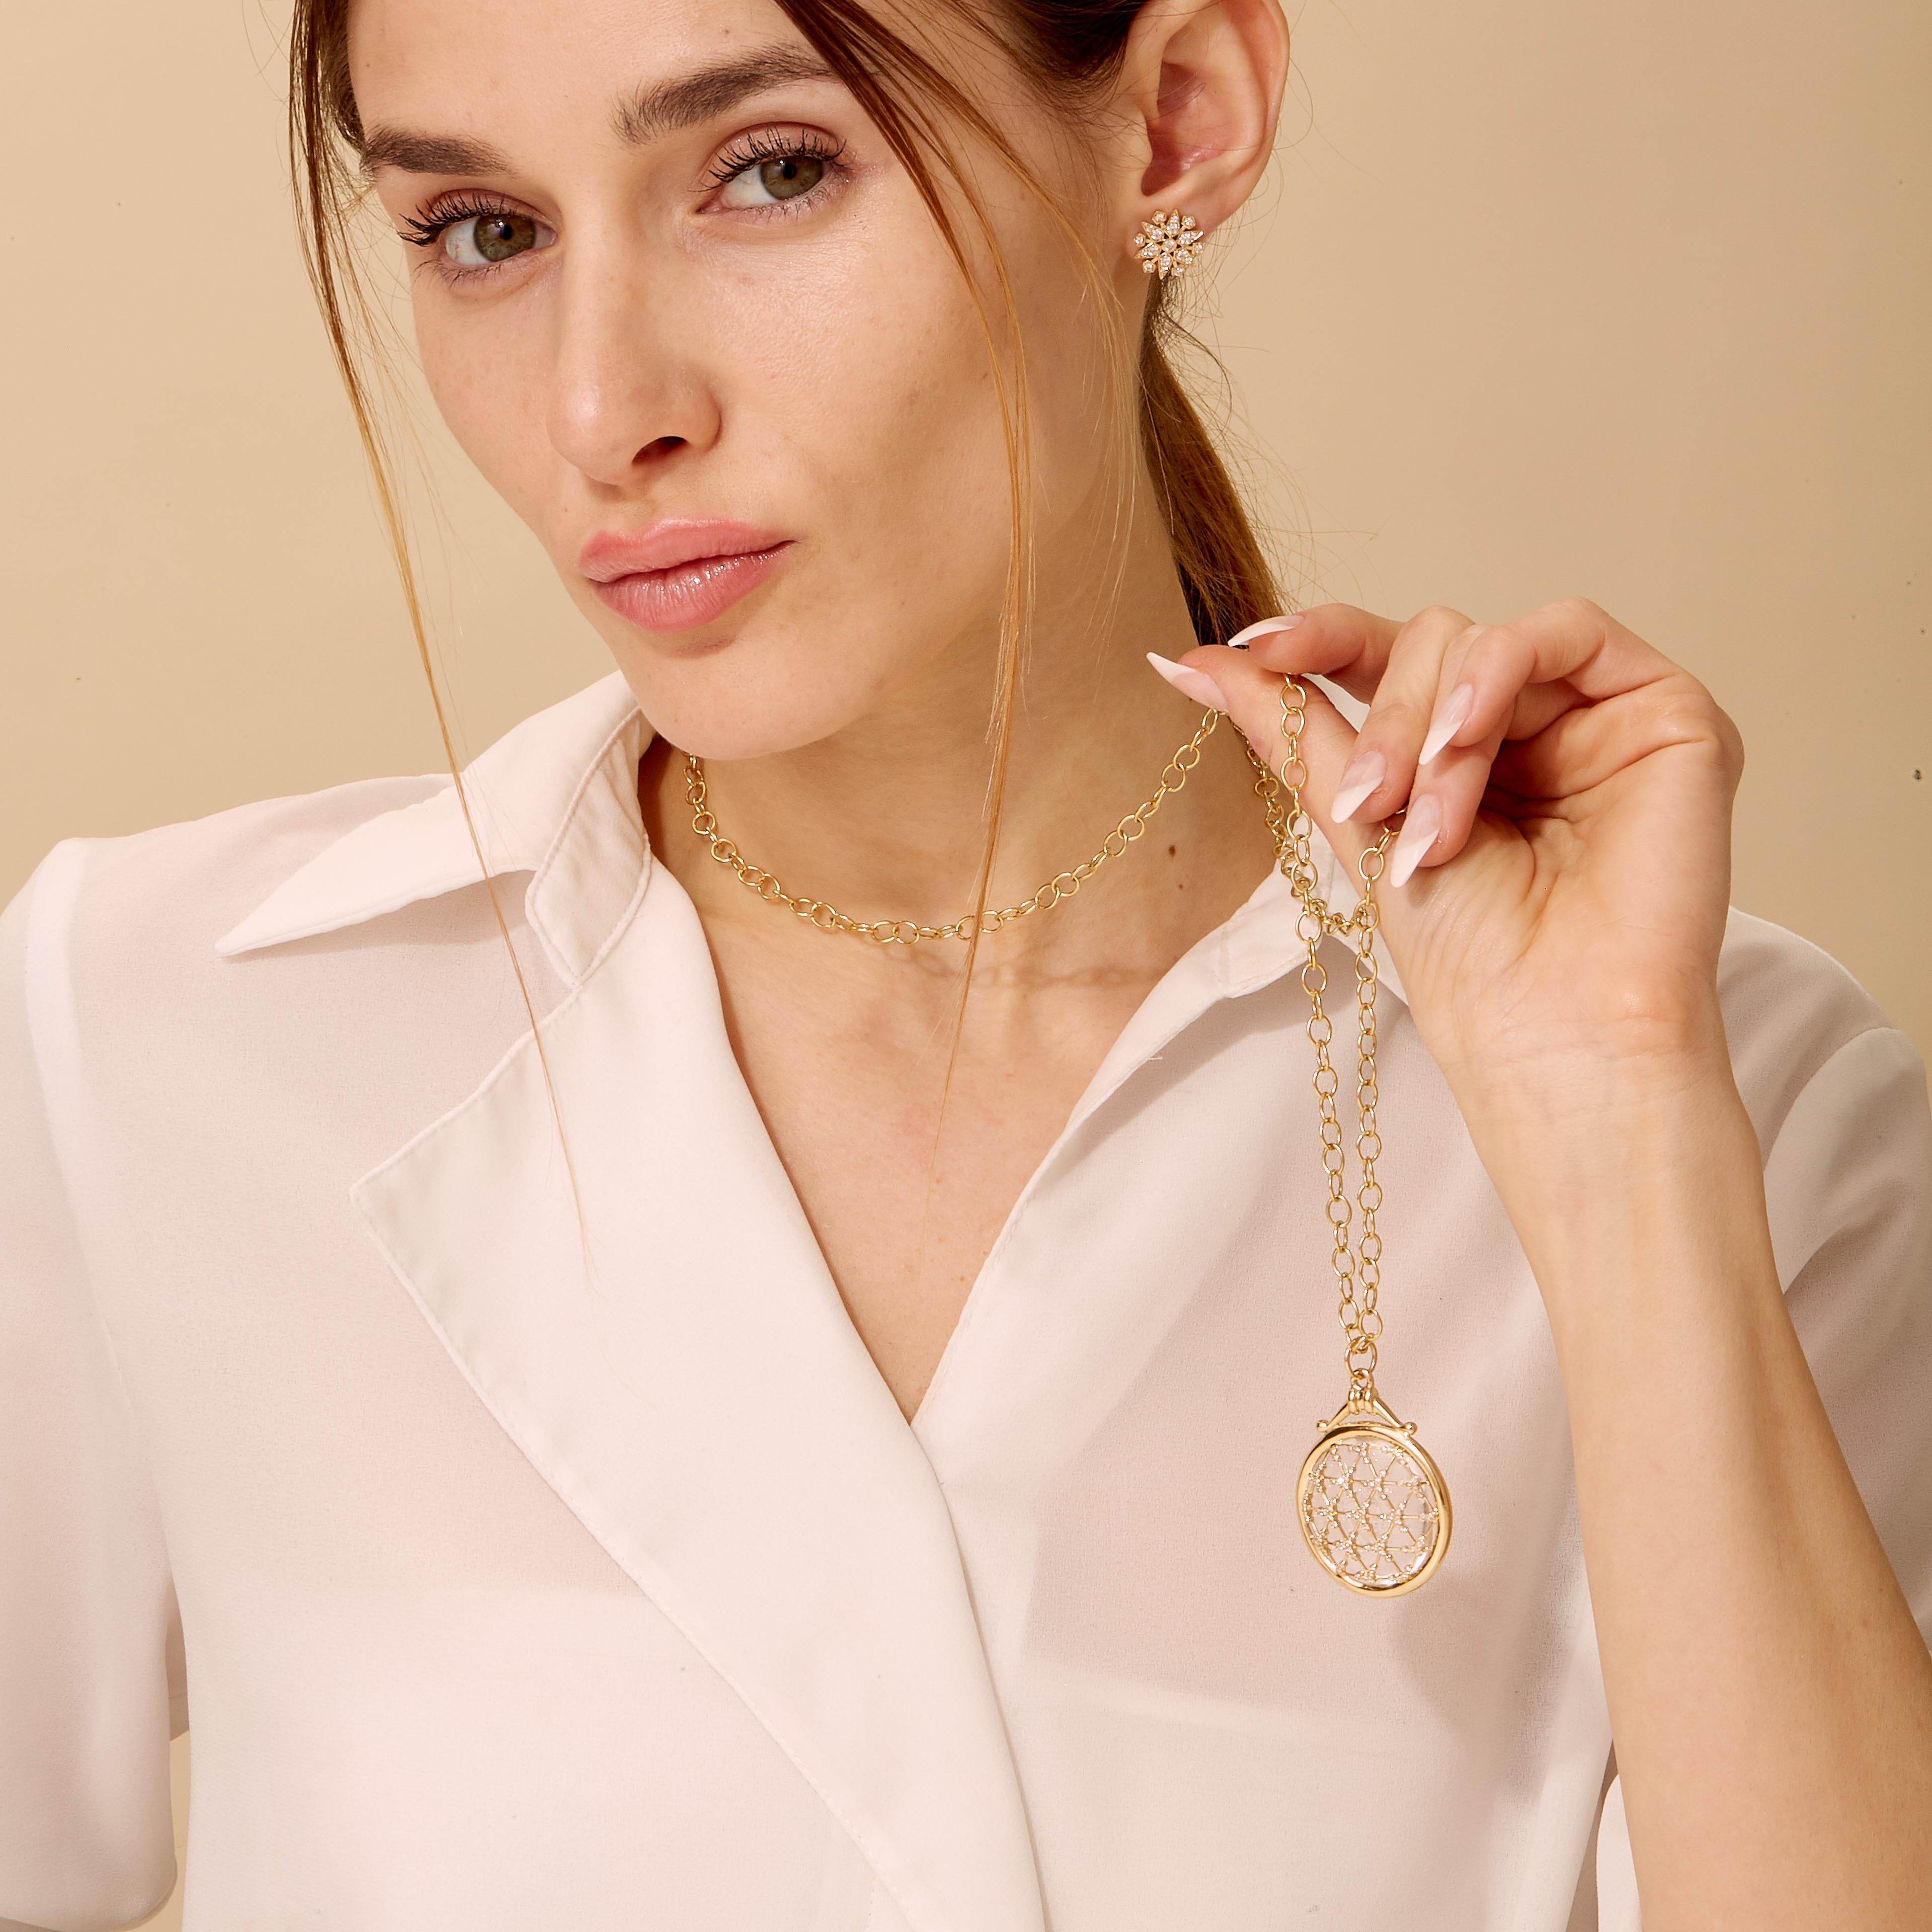 Created in 18 karat yellow gold
Rock crystal 45 carats approx.
Diamonds 0.50 carat approx.
Chain sold separately
Limited edition

Crafted from 18-karat yellow gold, the Candy Gem Sugarloaf Necklace features a stunning rock crystal of approximately